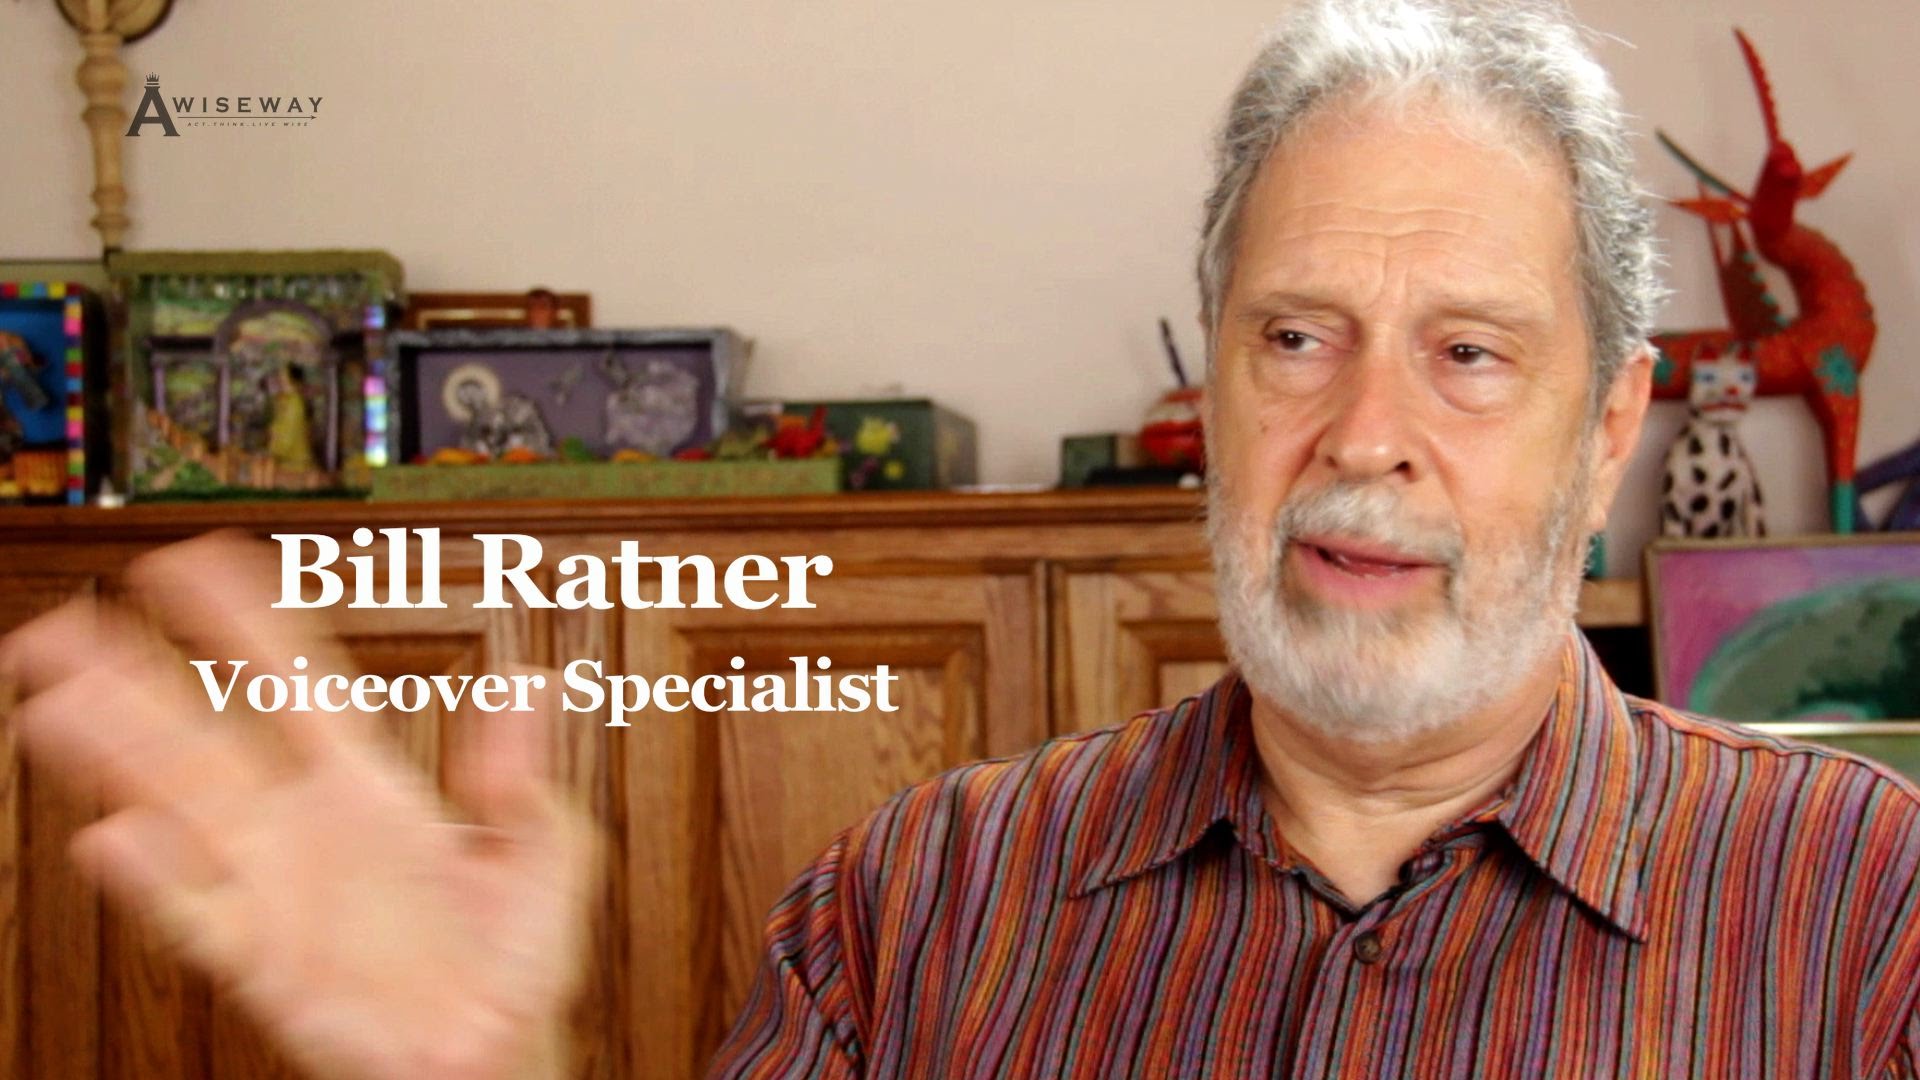 Voiceover Specialist Explains What He Loves Most About the Profession